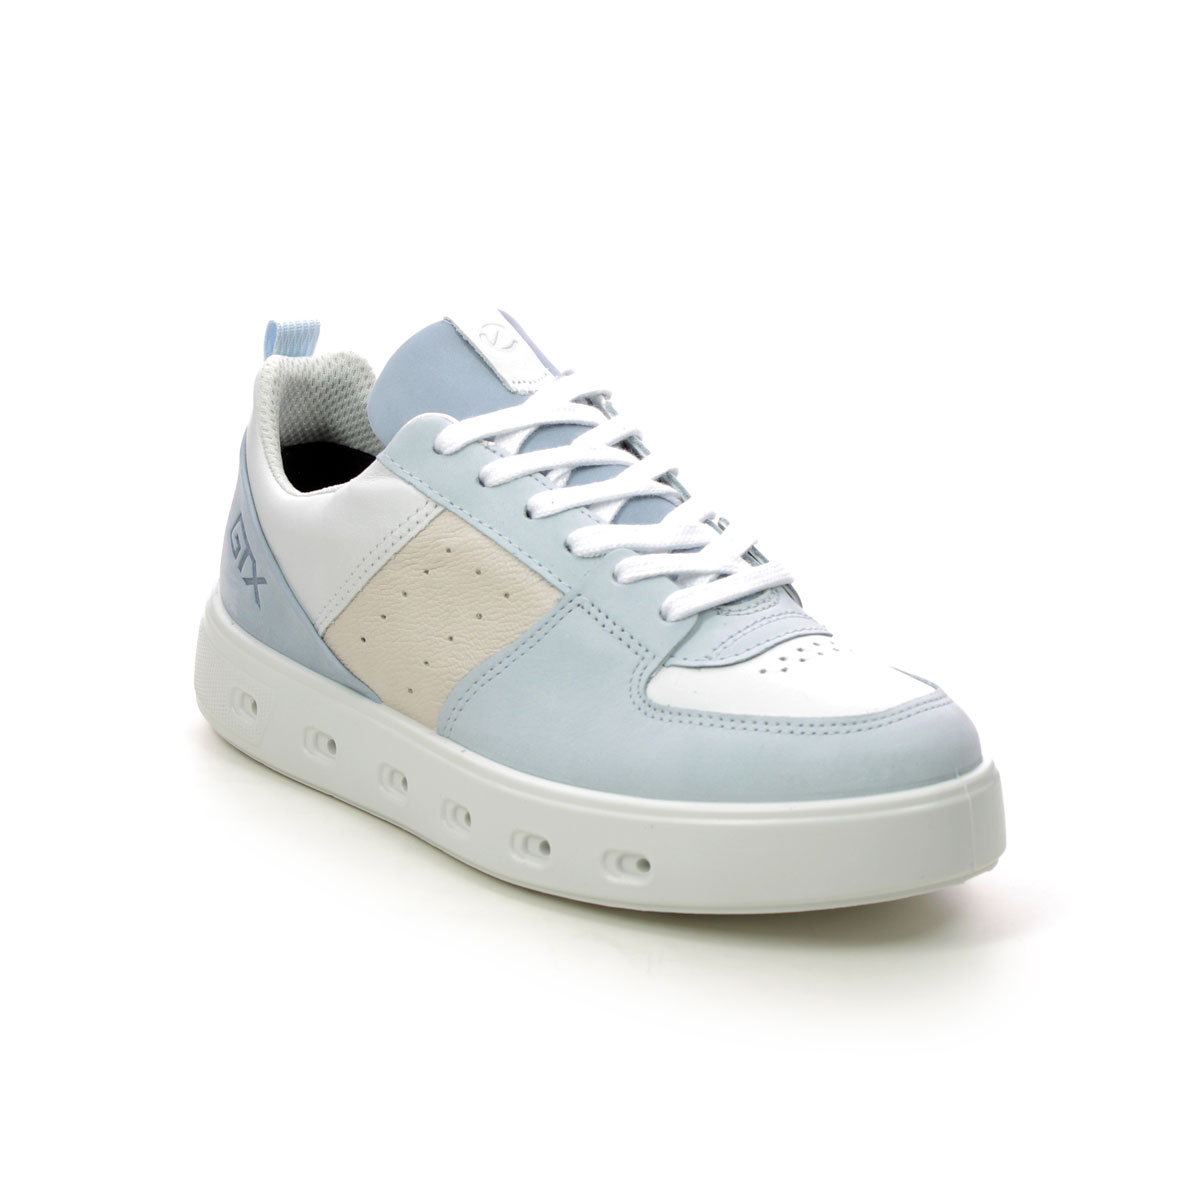 ECCO Street 720 Gtx Pale blue Womens trainers 209713-60722 in a Plain Leather in Size 37